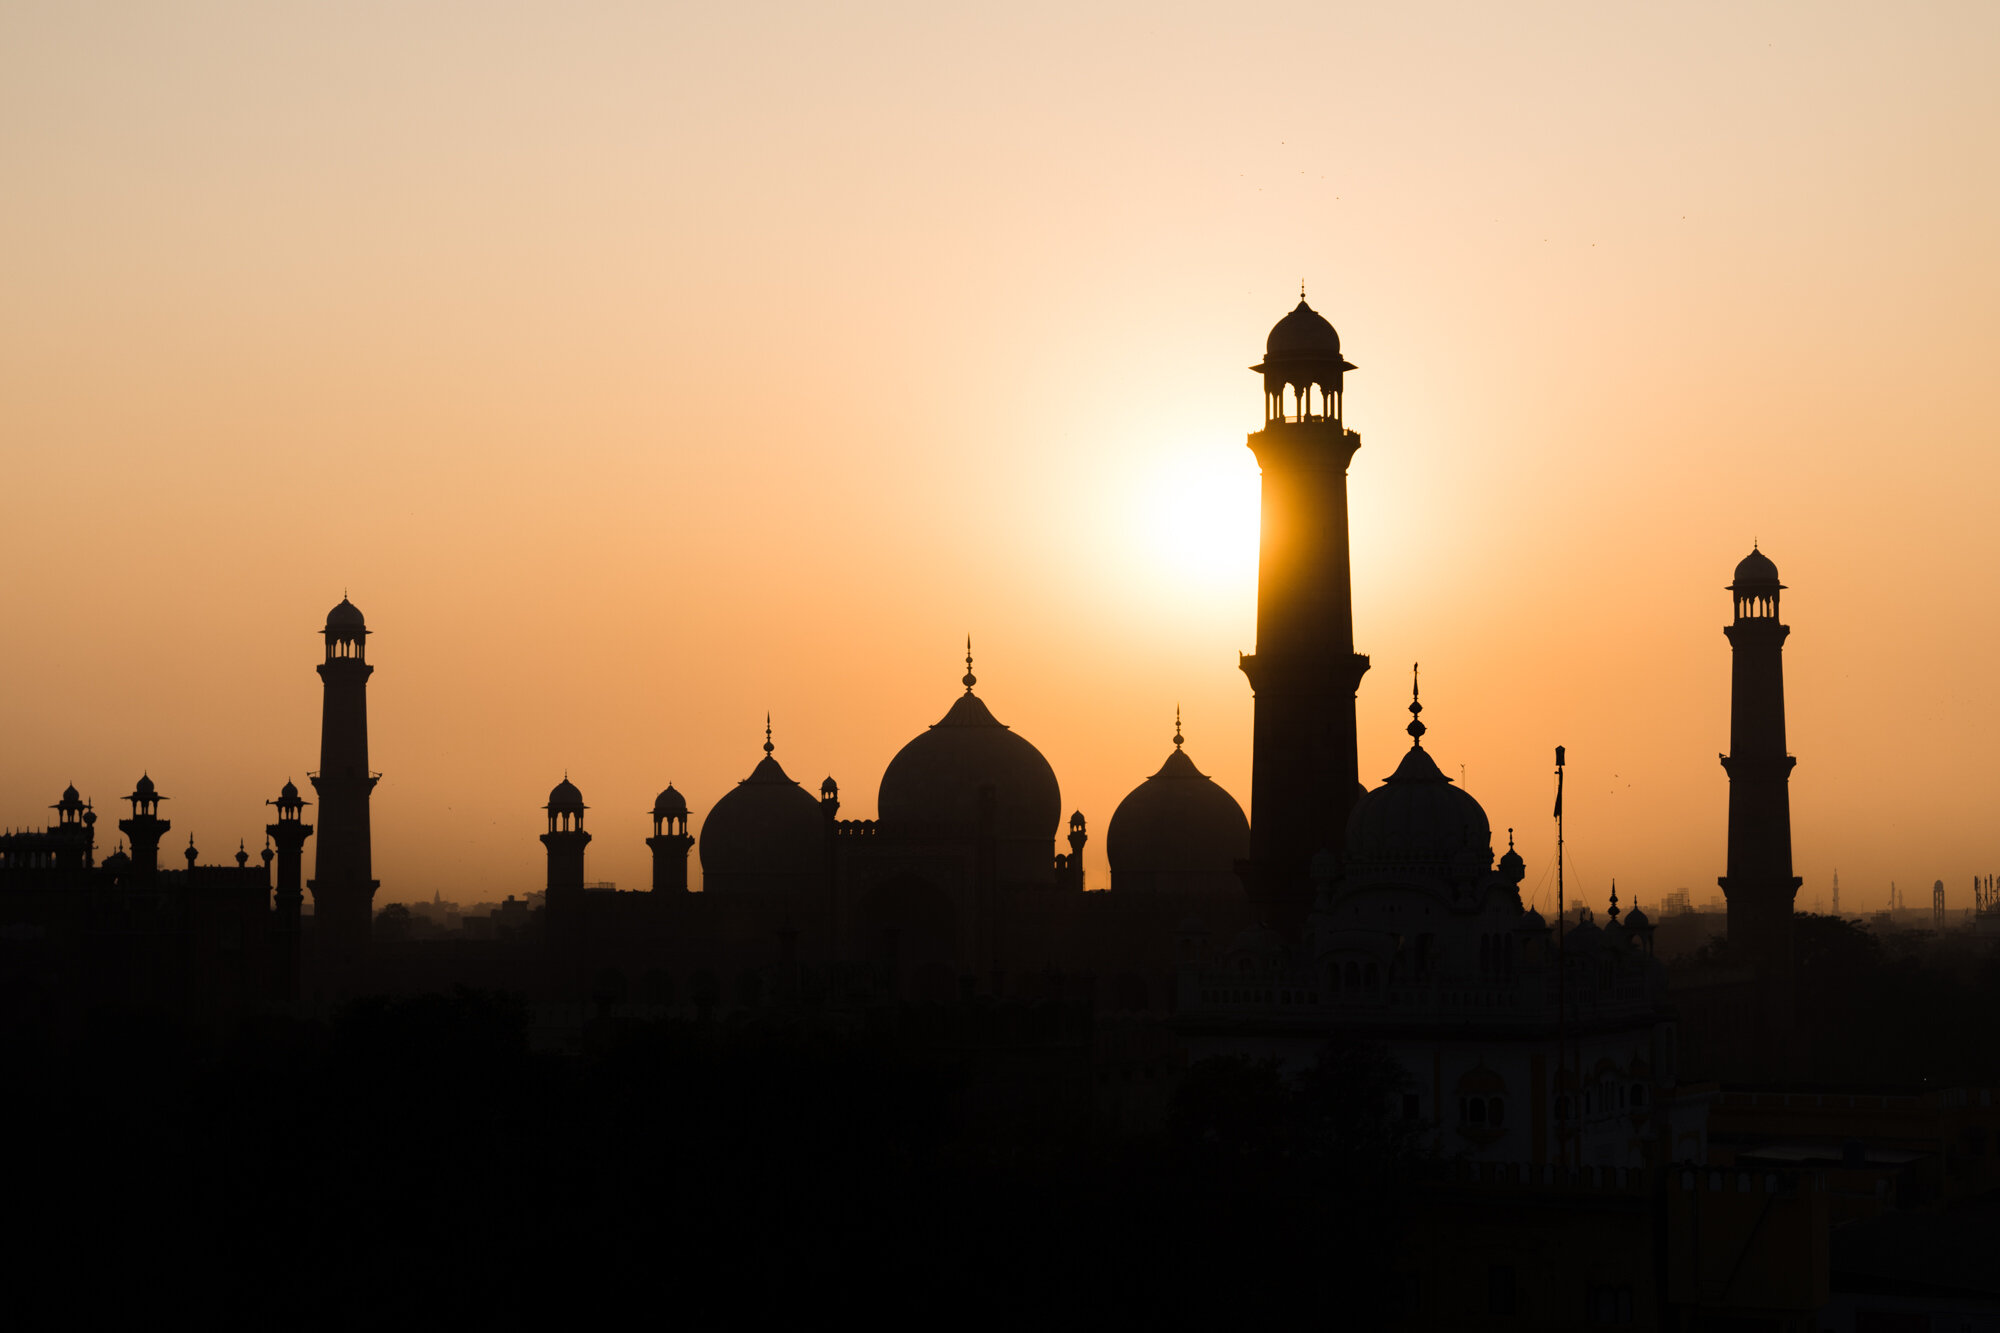  Sunset over the Badshahi mosque.  Shez Raja, a jazz musician got in touch with me to ask if he could use this photo on the front cover of his album, I can’t wait to see it! 